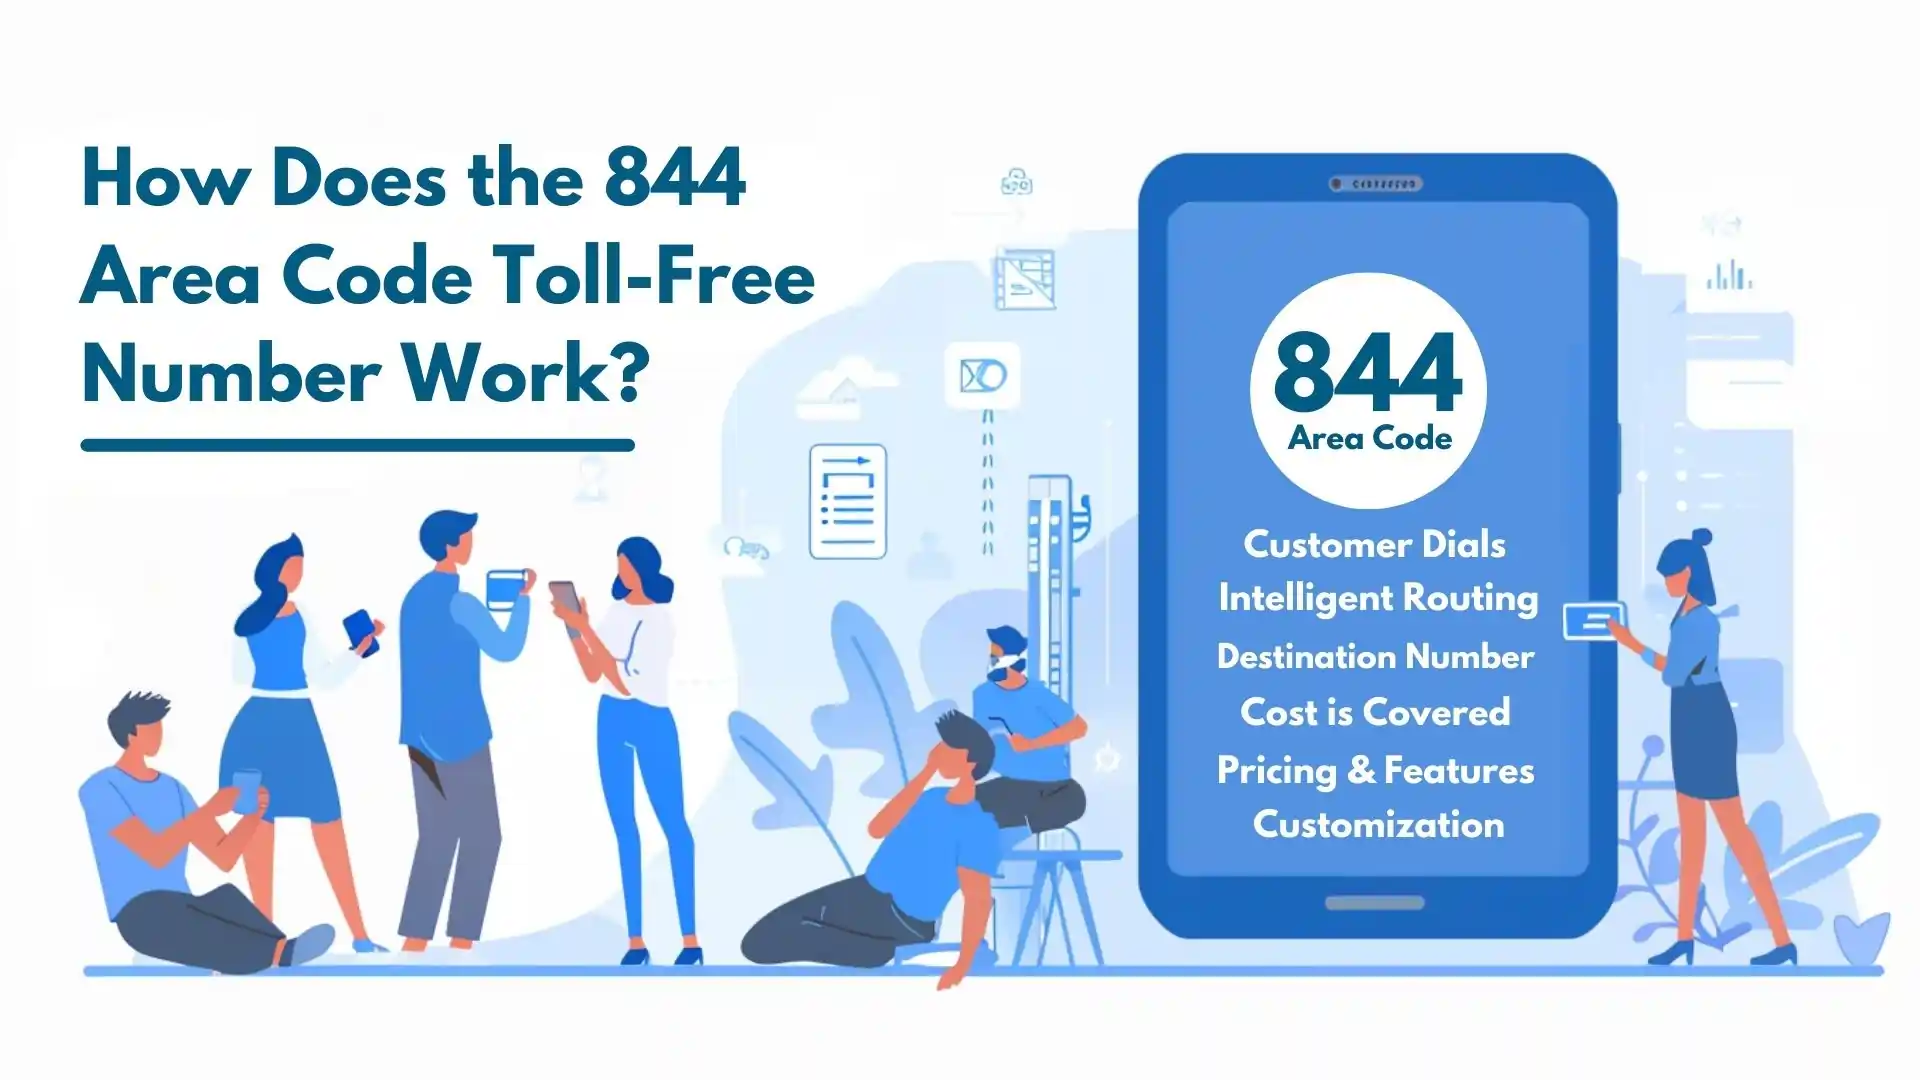 How Does the 844 Area Code Toll-Free Number Work